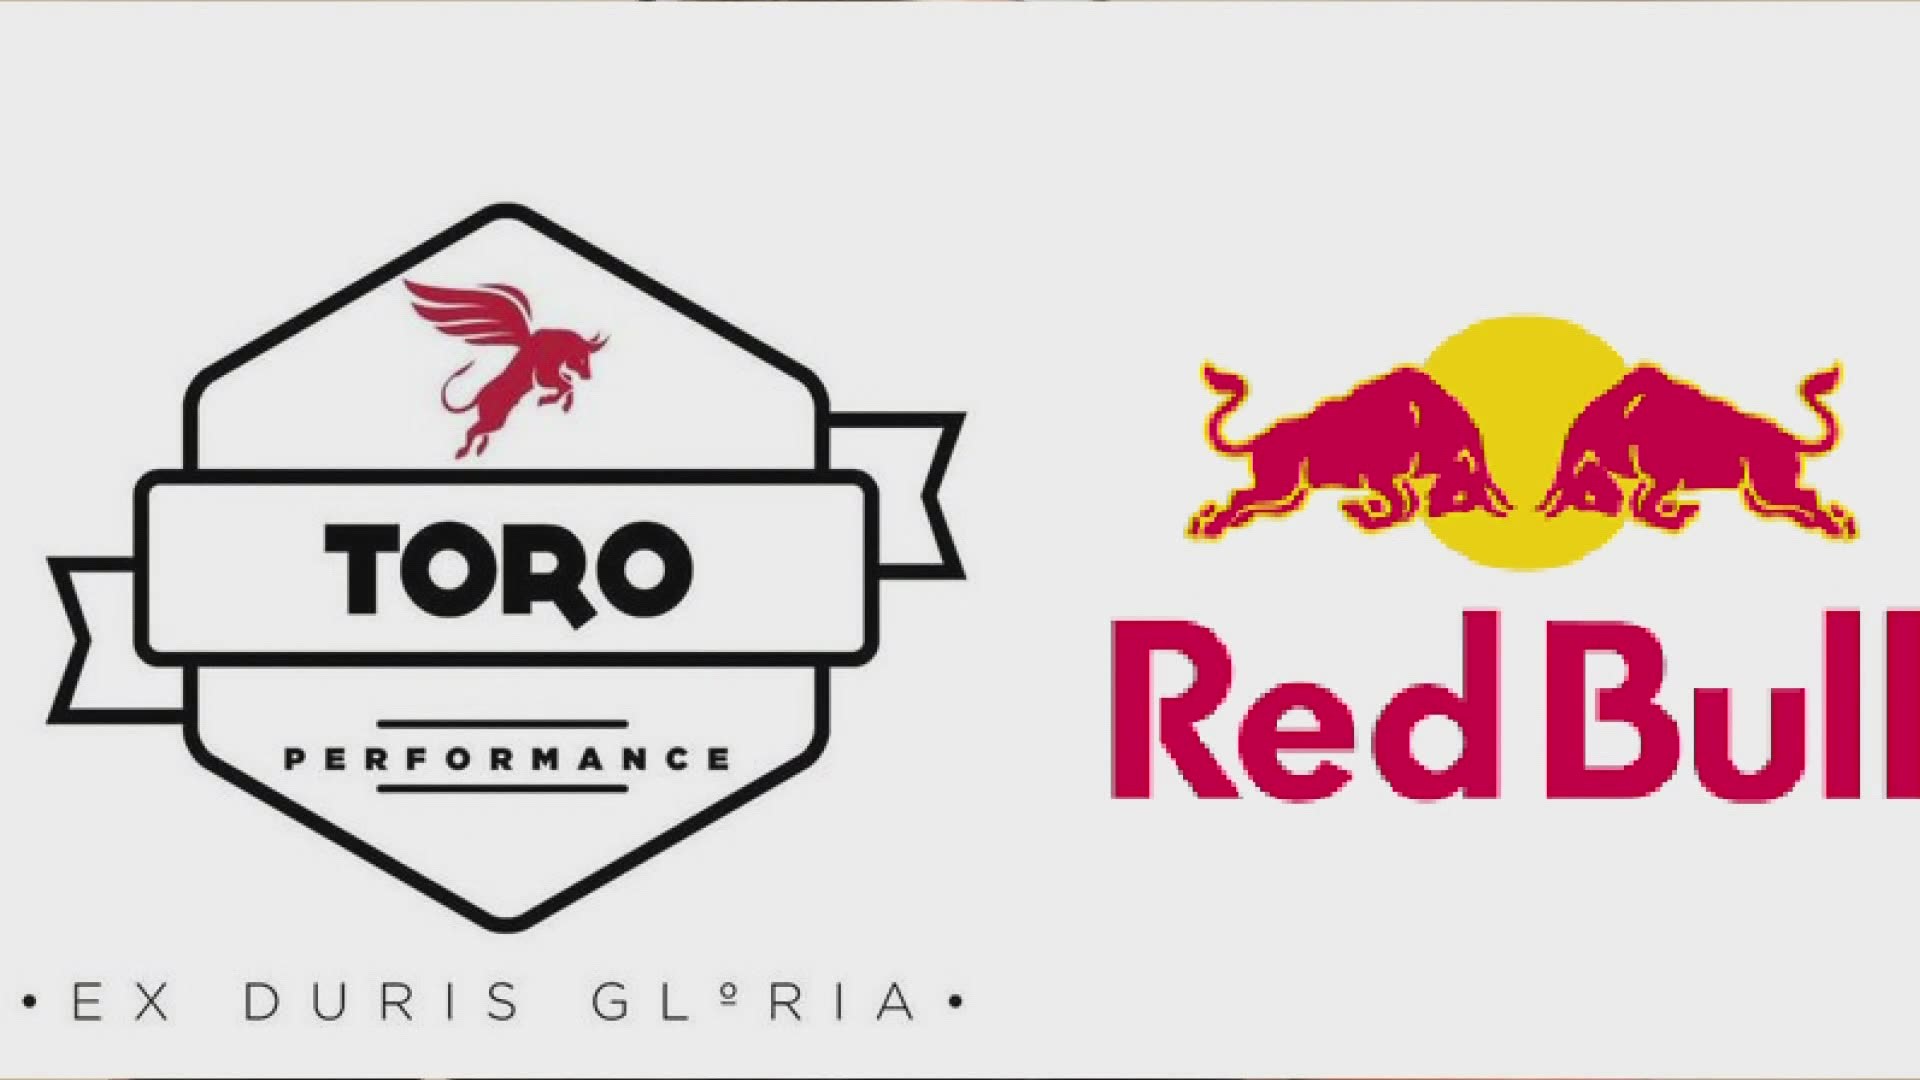 A small valley business in North Phoenix, "Toro Performance" is dealing with a big trademark battle against the popular energy drink Red Bull.